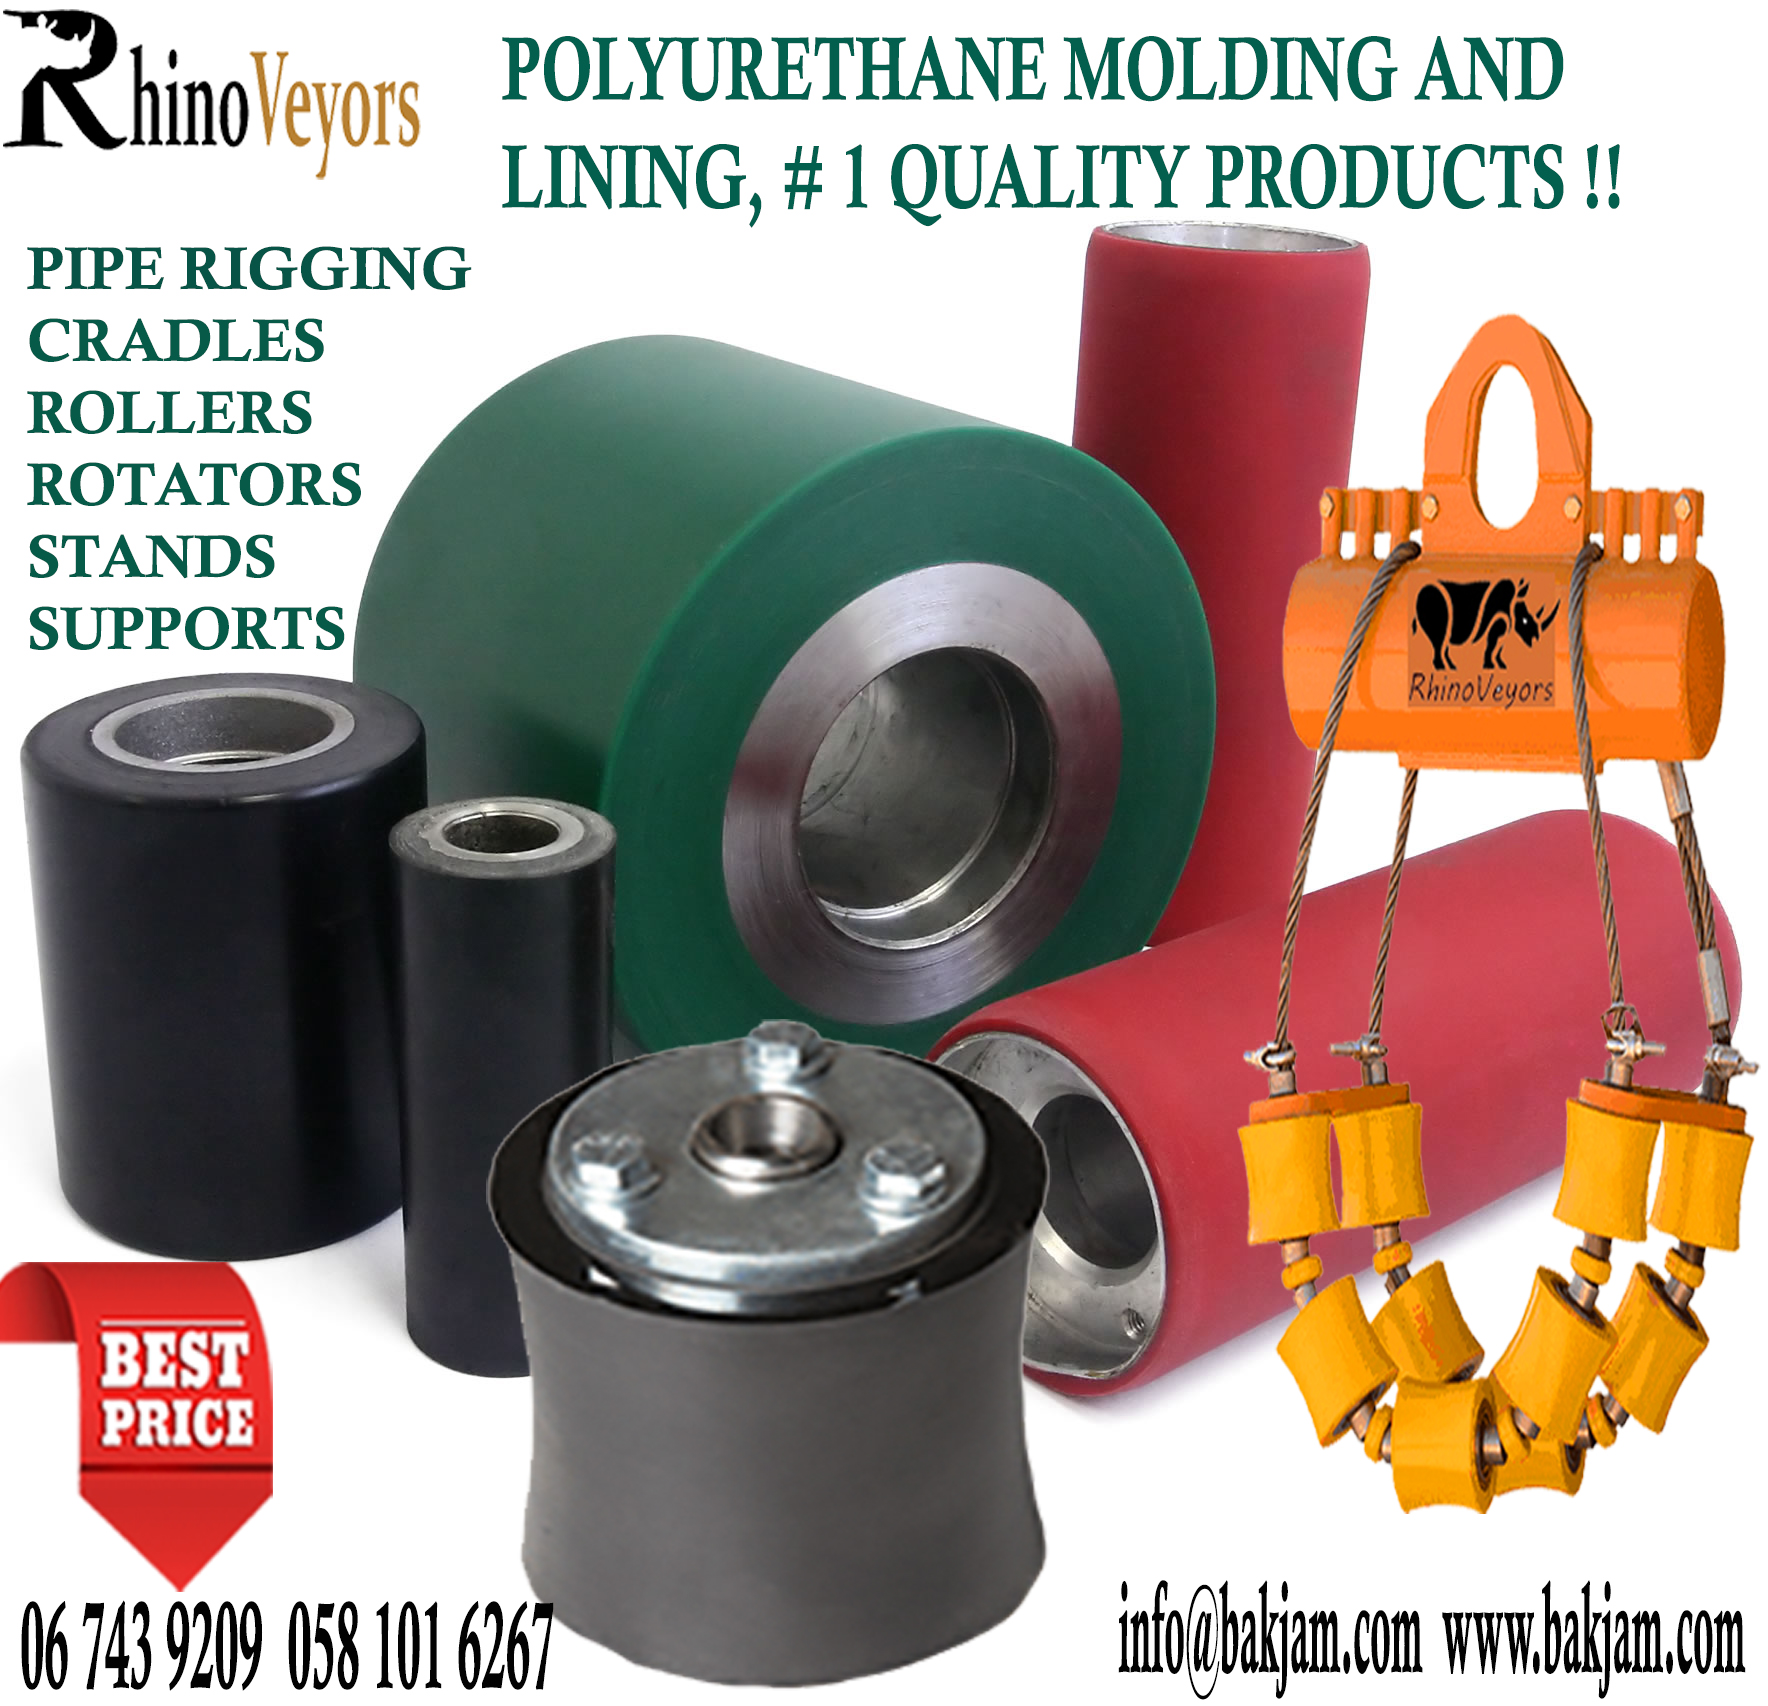 pipe-rigging-accessories-polyurethane-rollers-pipe-cradles